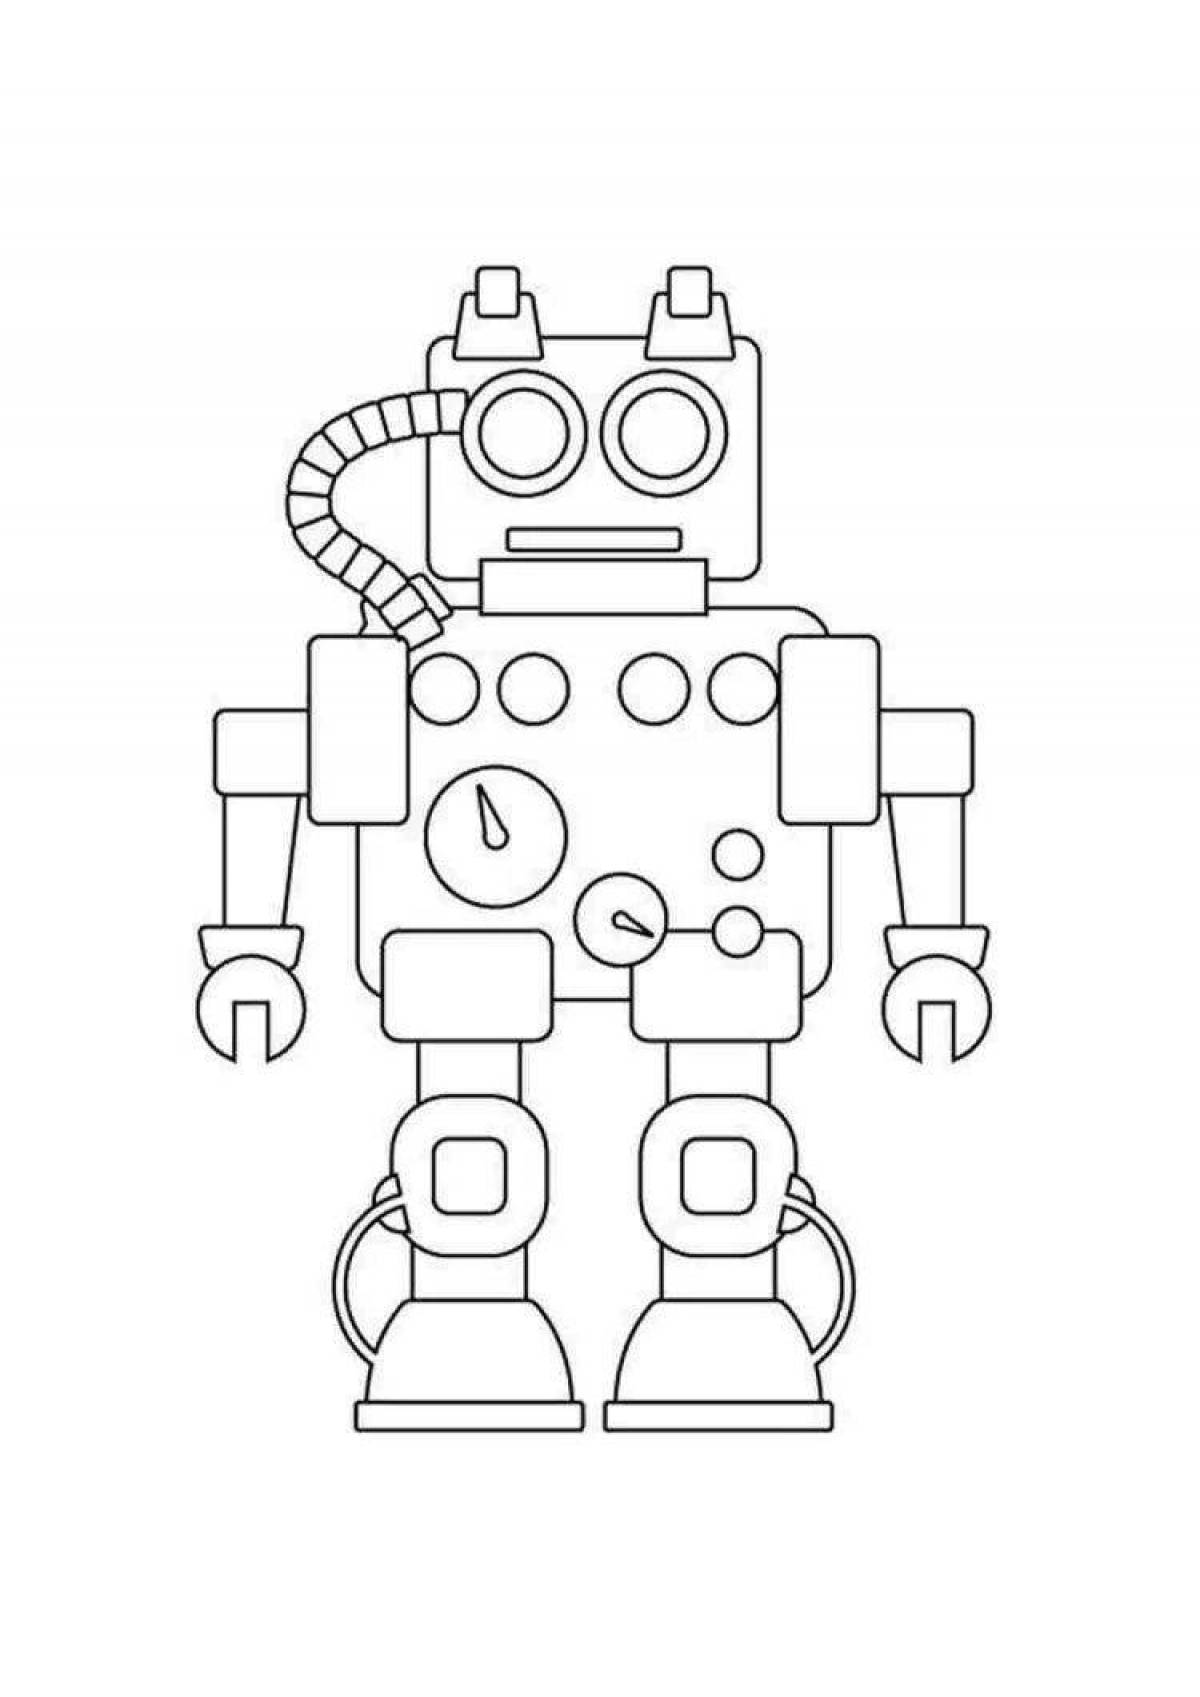 Live coloring robots for boys 5-6 years old